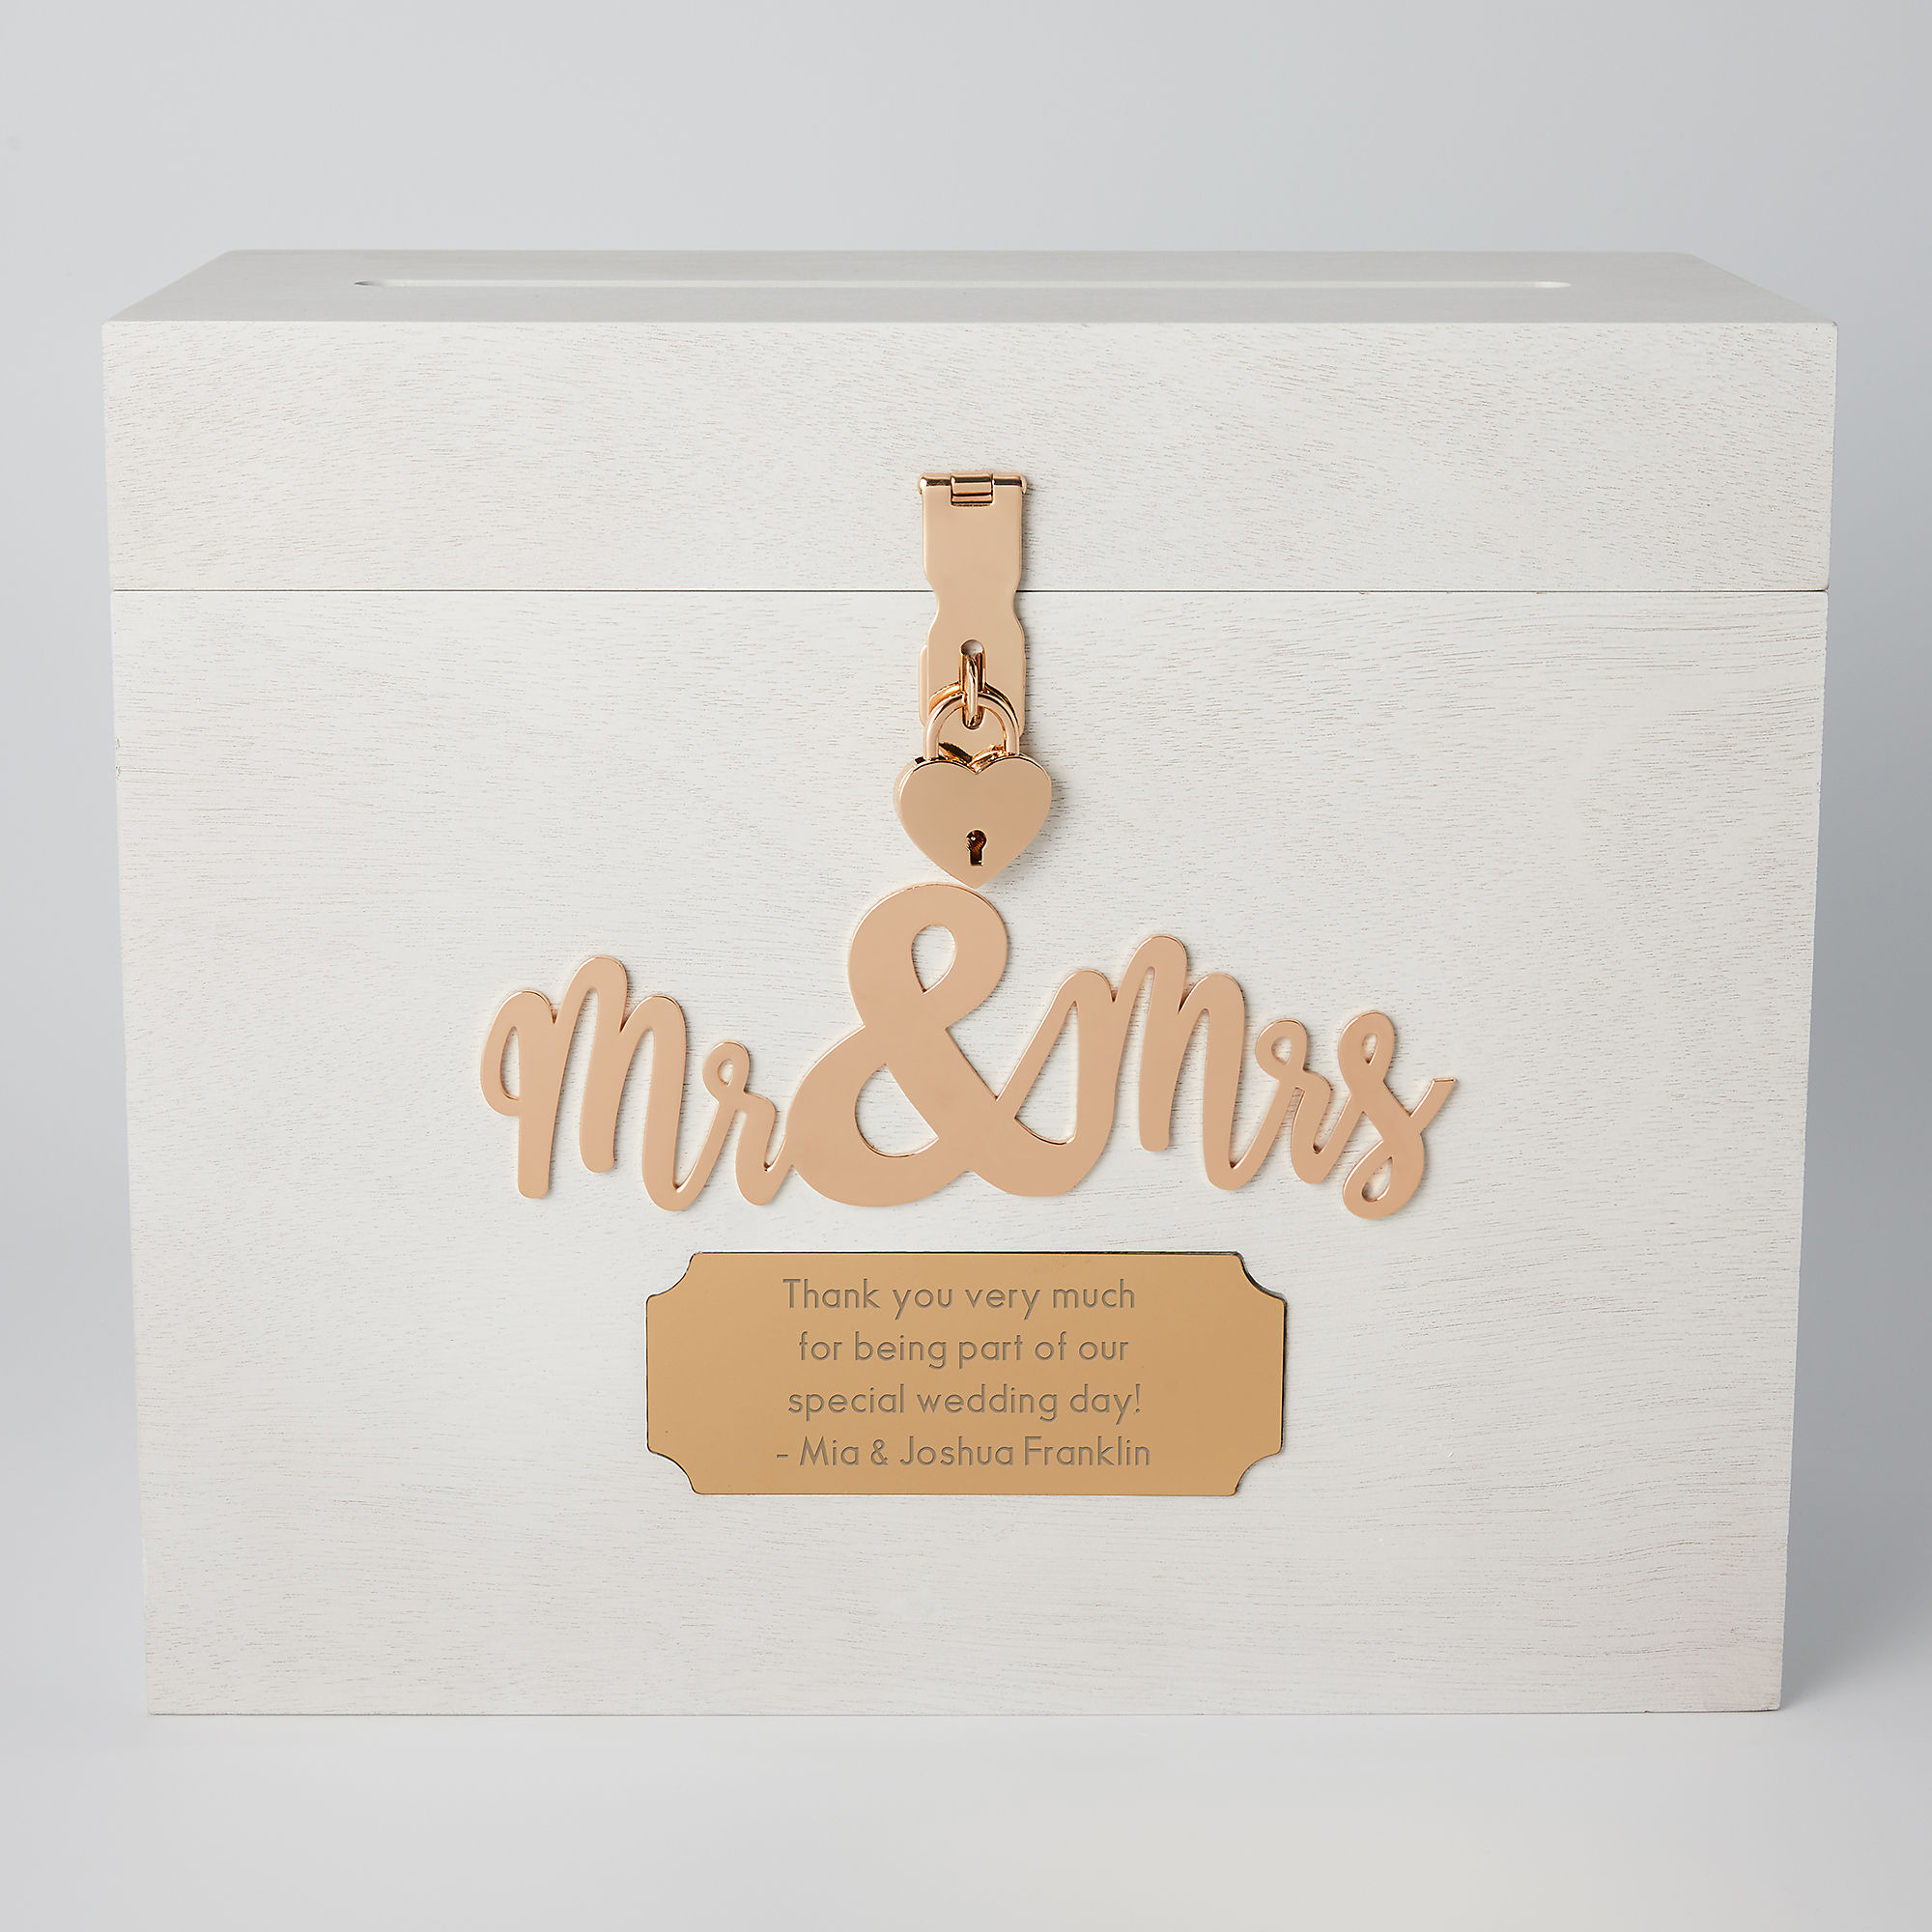 WEDDING CARD POST BOX Heart Design Receiving Well Wishing Table Decorations 